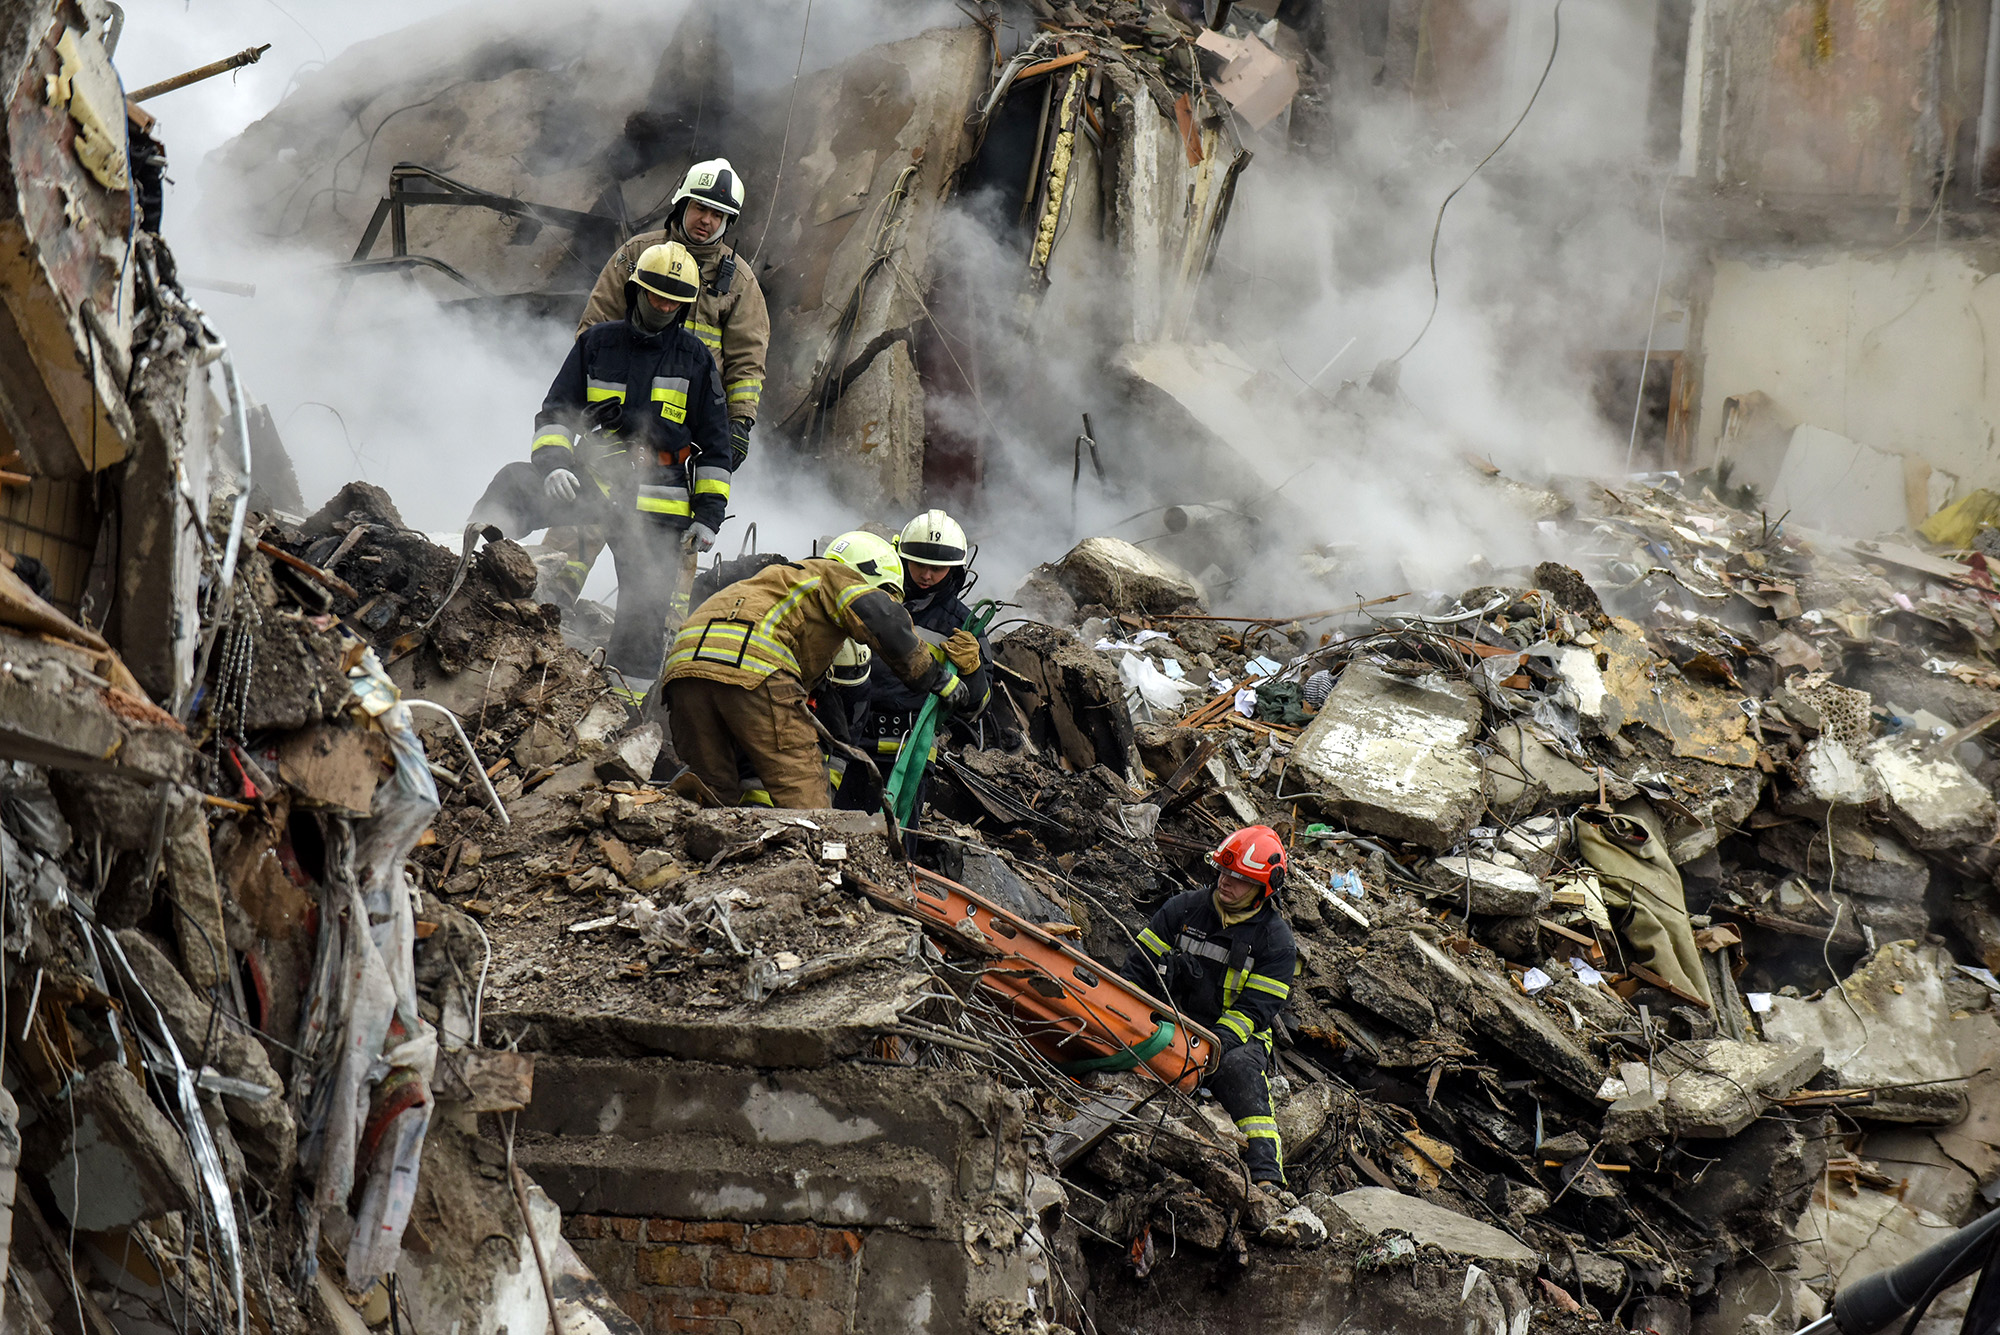 Rescue workers remove the body of a victim from the debris of a damaged residential building in Dnipro, southeastern Ukraine, on January 15.